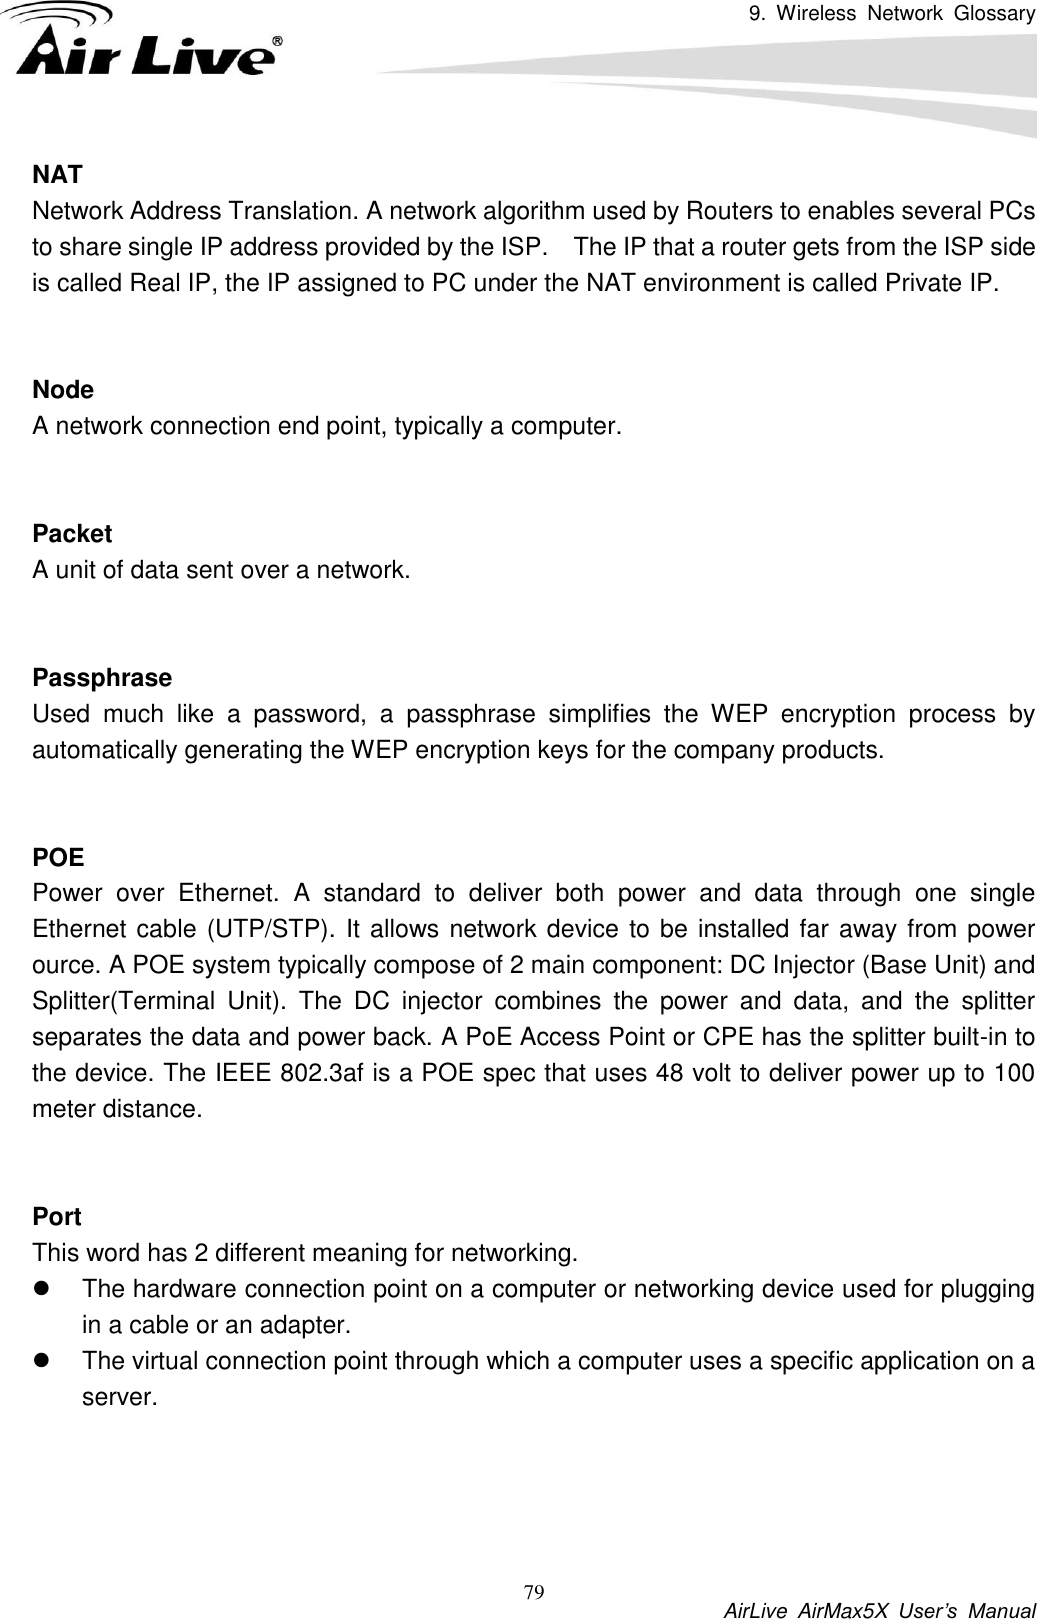 9.  Wireless  Network  Glossary           AirLive  AirMax5X  User’s  Manual 79 NAT Network Address Translation. A network algorithm used by Routers to enables several PCs to share single IP address provided by the ISP.    The IP that a router gets from the ISP side is called Real IP, the IP assigned to PC under the NAT environment is called Private IP.   Node A network connection end point, typically a computer.   Packet A unit of data sent over a network.   Passphrase Used  much  like  a  password,  a  passphrase  simplifies  the  WEP  encryption  process  by automatically generating the WEP encryption keys for the company products.   POE Power  over  Ethernet.  A  standard  to  deliver  both  power  and  data  through  one  single Ethernet cable (UTP/STP). It allows network device to be installed far away from power ource. A POE system typically compose of 2 main component: DC Injector (Base Unit) and Splitter(Terminal  Unit).  The  DC  injector  combines  the  power  and  data,  and  the  splitter separates the data and power back. A PoE Access Point or CPE has the splitter built-in to the device. The IEEE 802.3af is a POE spec that uses 48 volt to deliver power up to 100 meter distance.   Port This word has 2 different meaning for networking.   The hardware connection point on a computer or networking device used for plugging in a cable or an adapter.   The virtual connection point through which a computer uses a specific application on a server.     